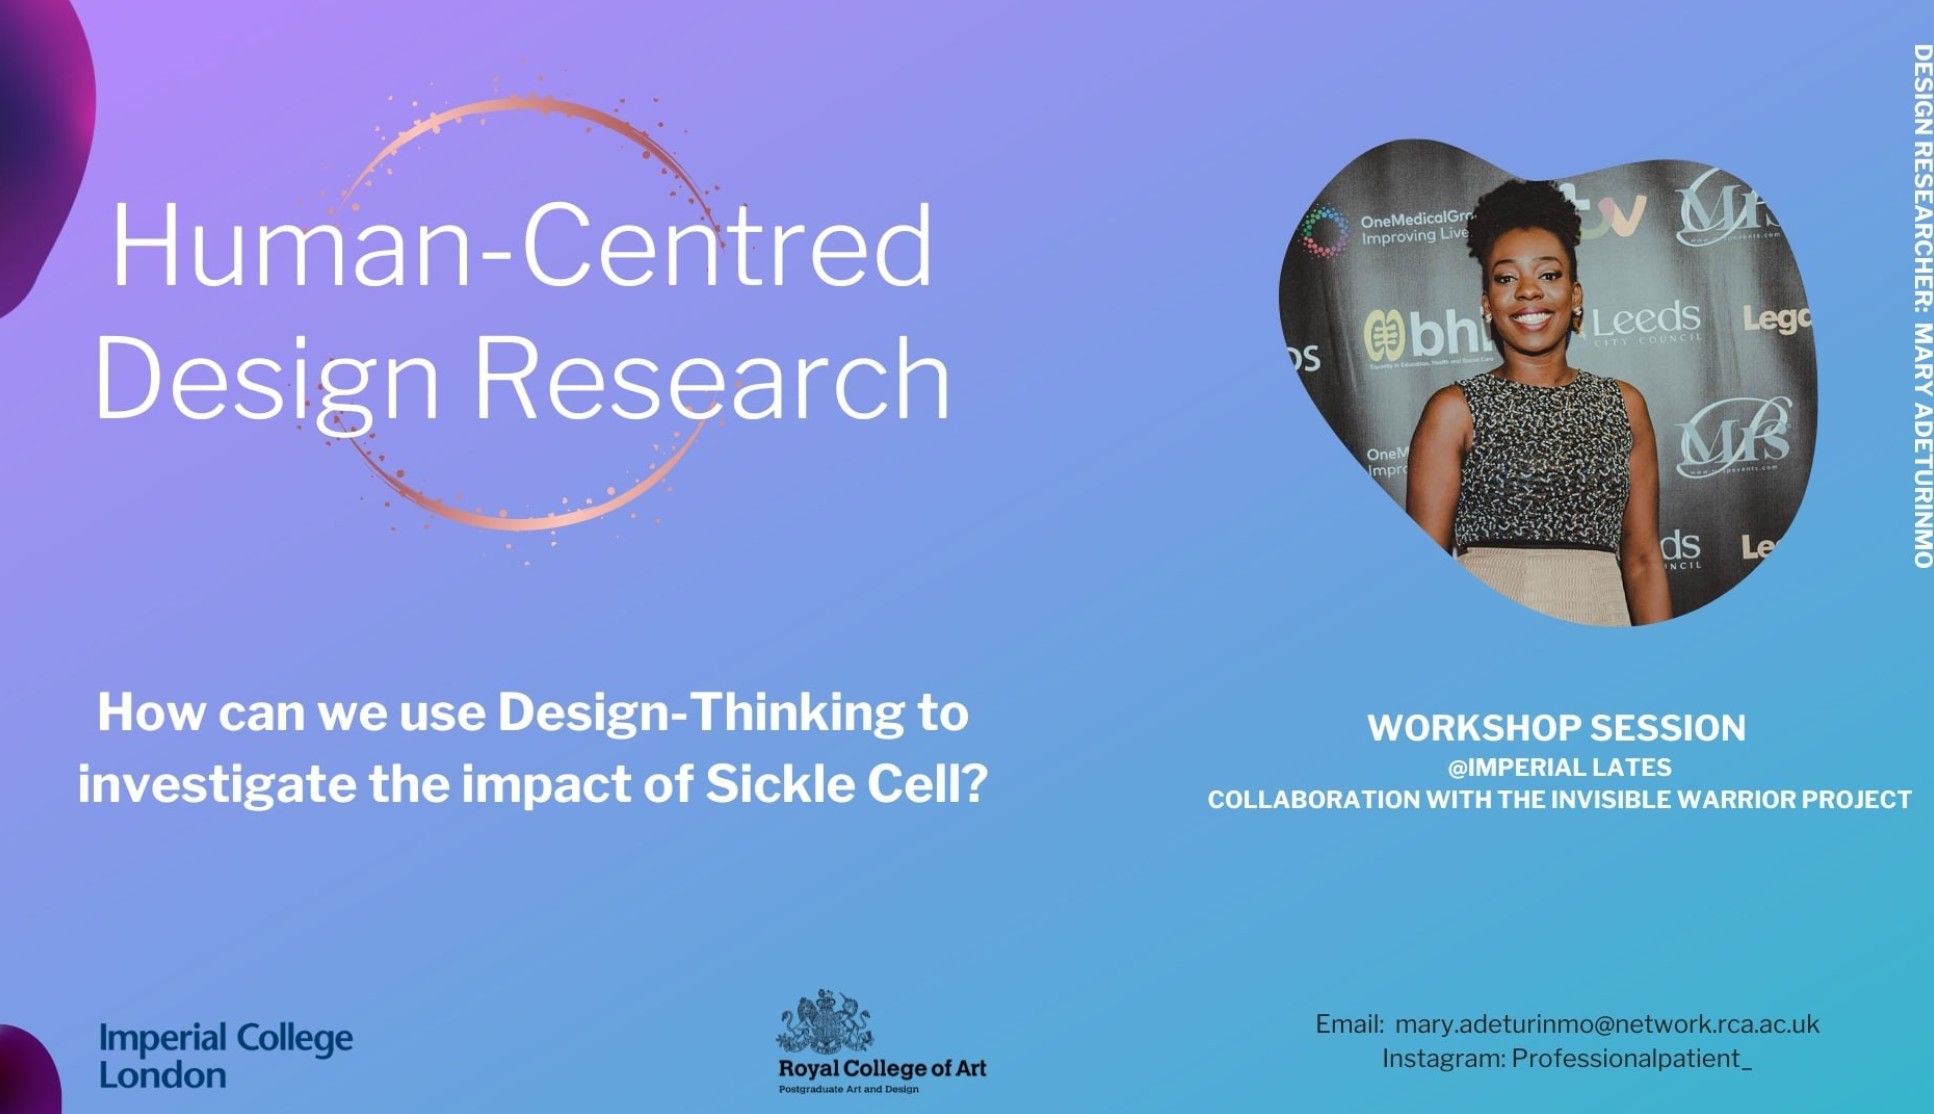 Purple banner which text 'Human-Centred Design Research: How can we use Design=Thinking to investigate the impact of Sickle Cell?'